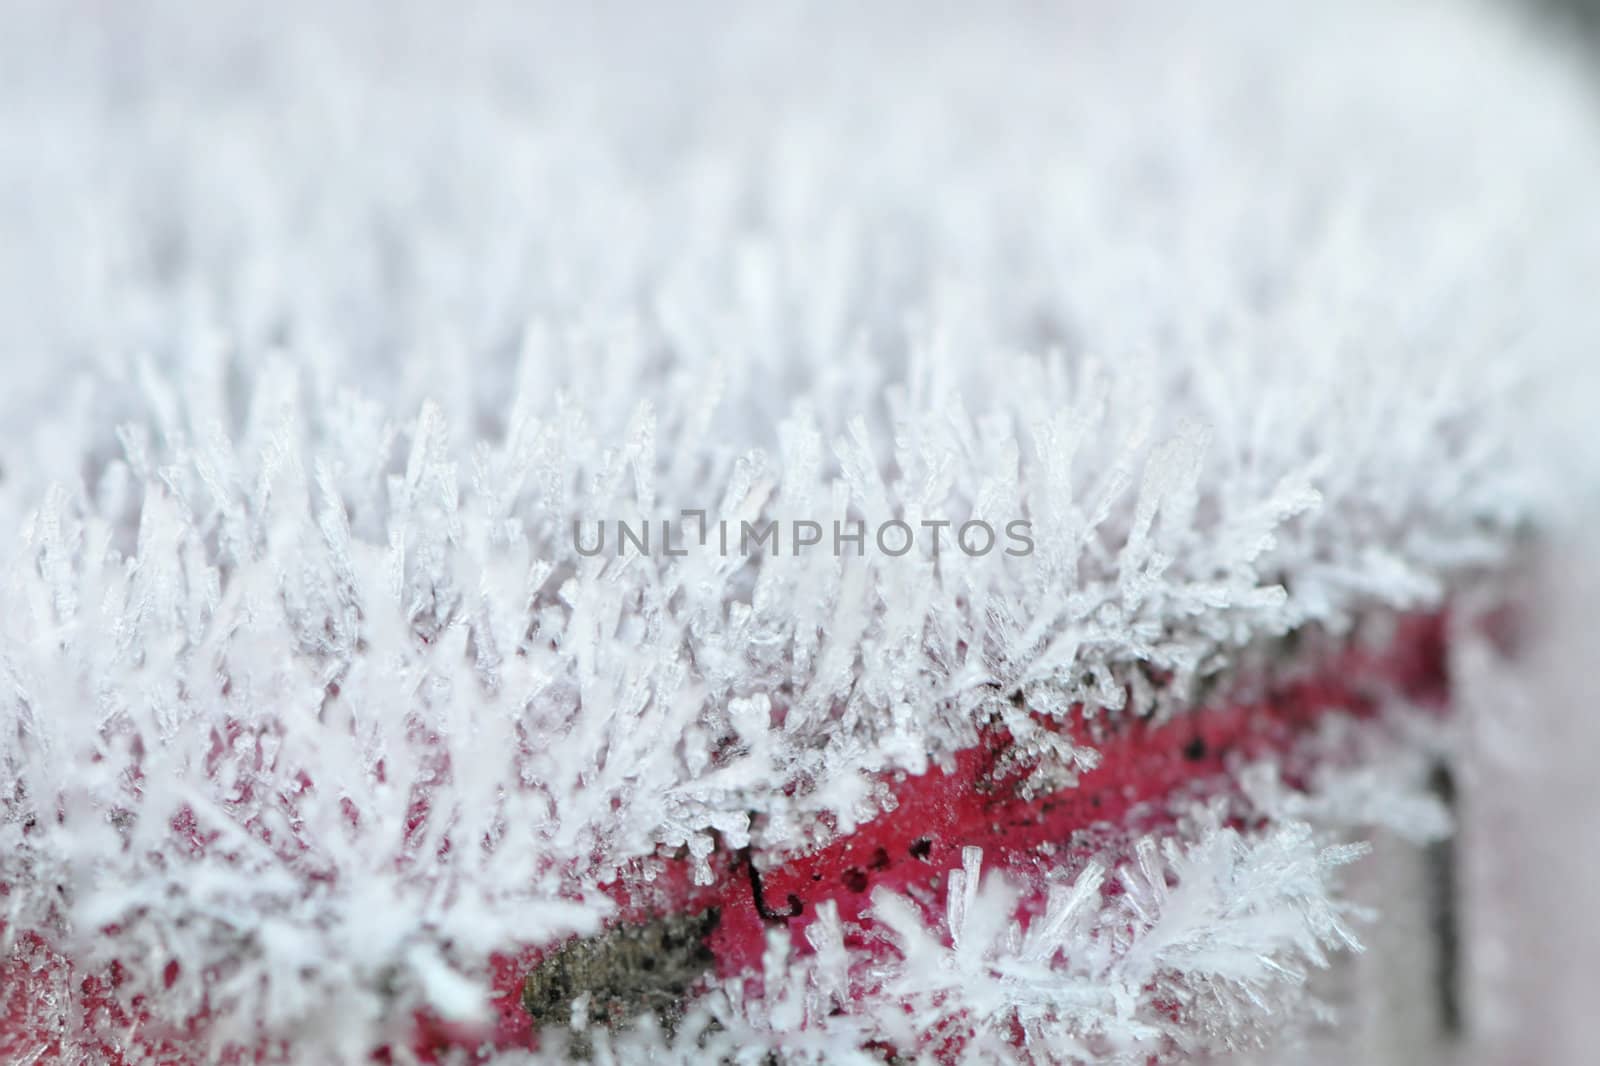 Lot of Frost on a Picket with a Red Line by shkyo30